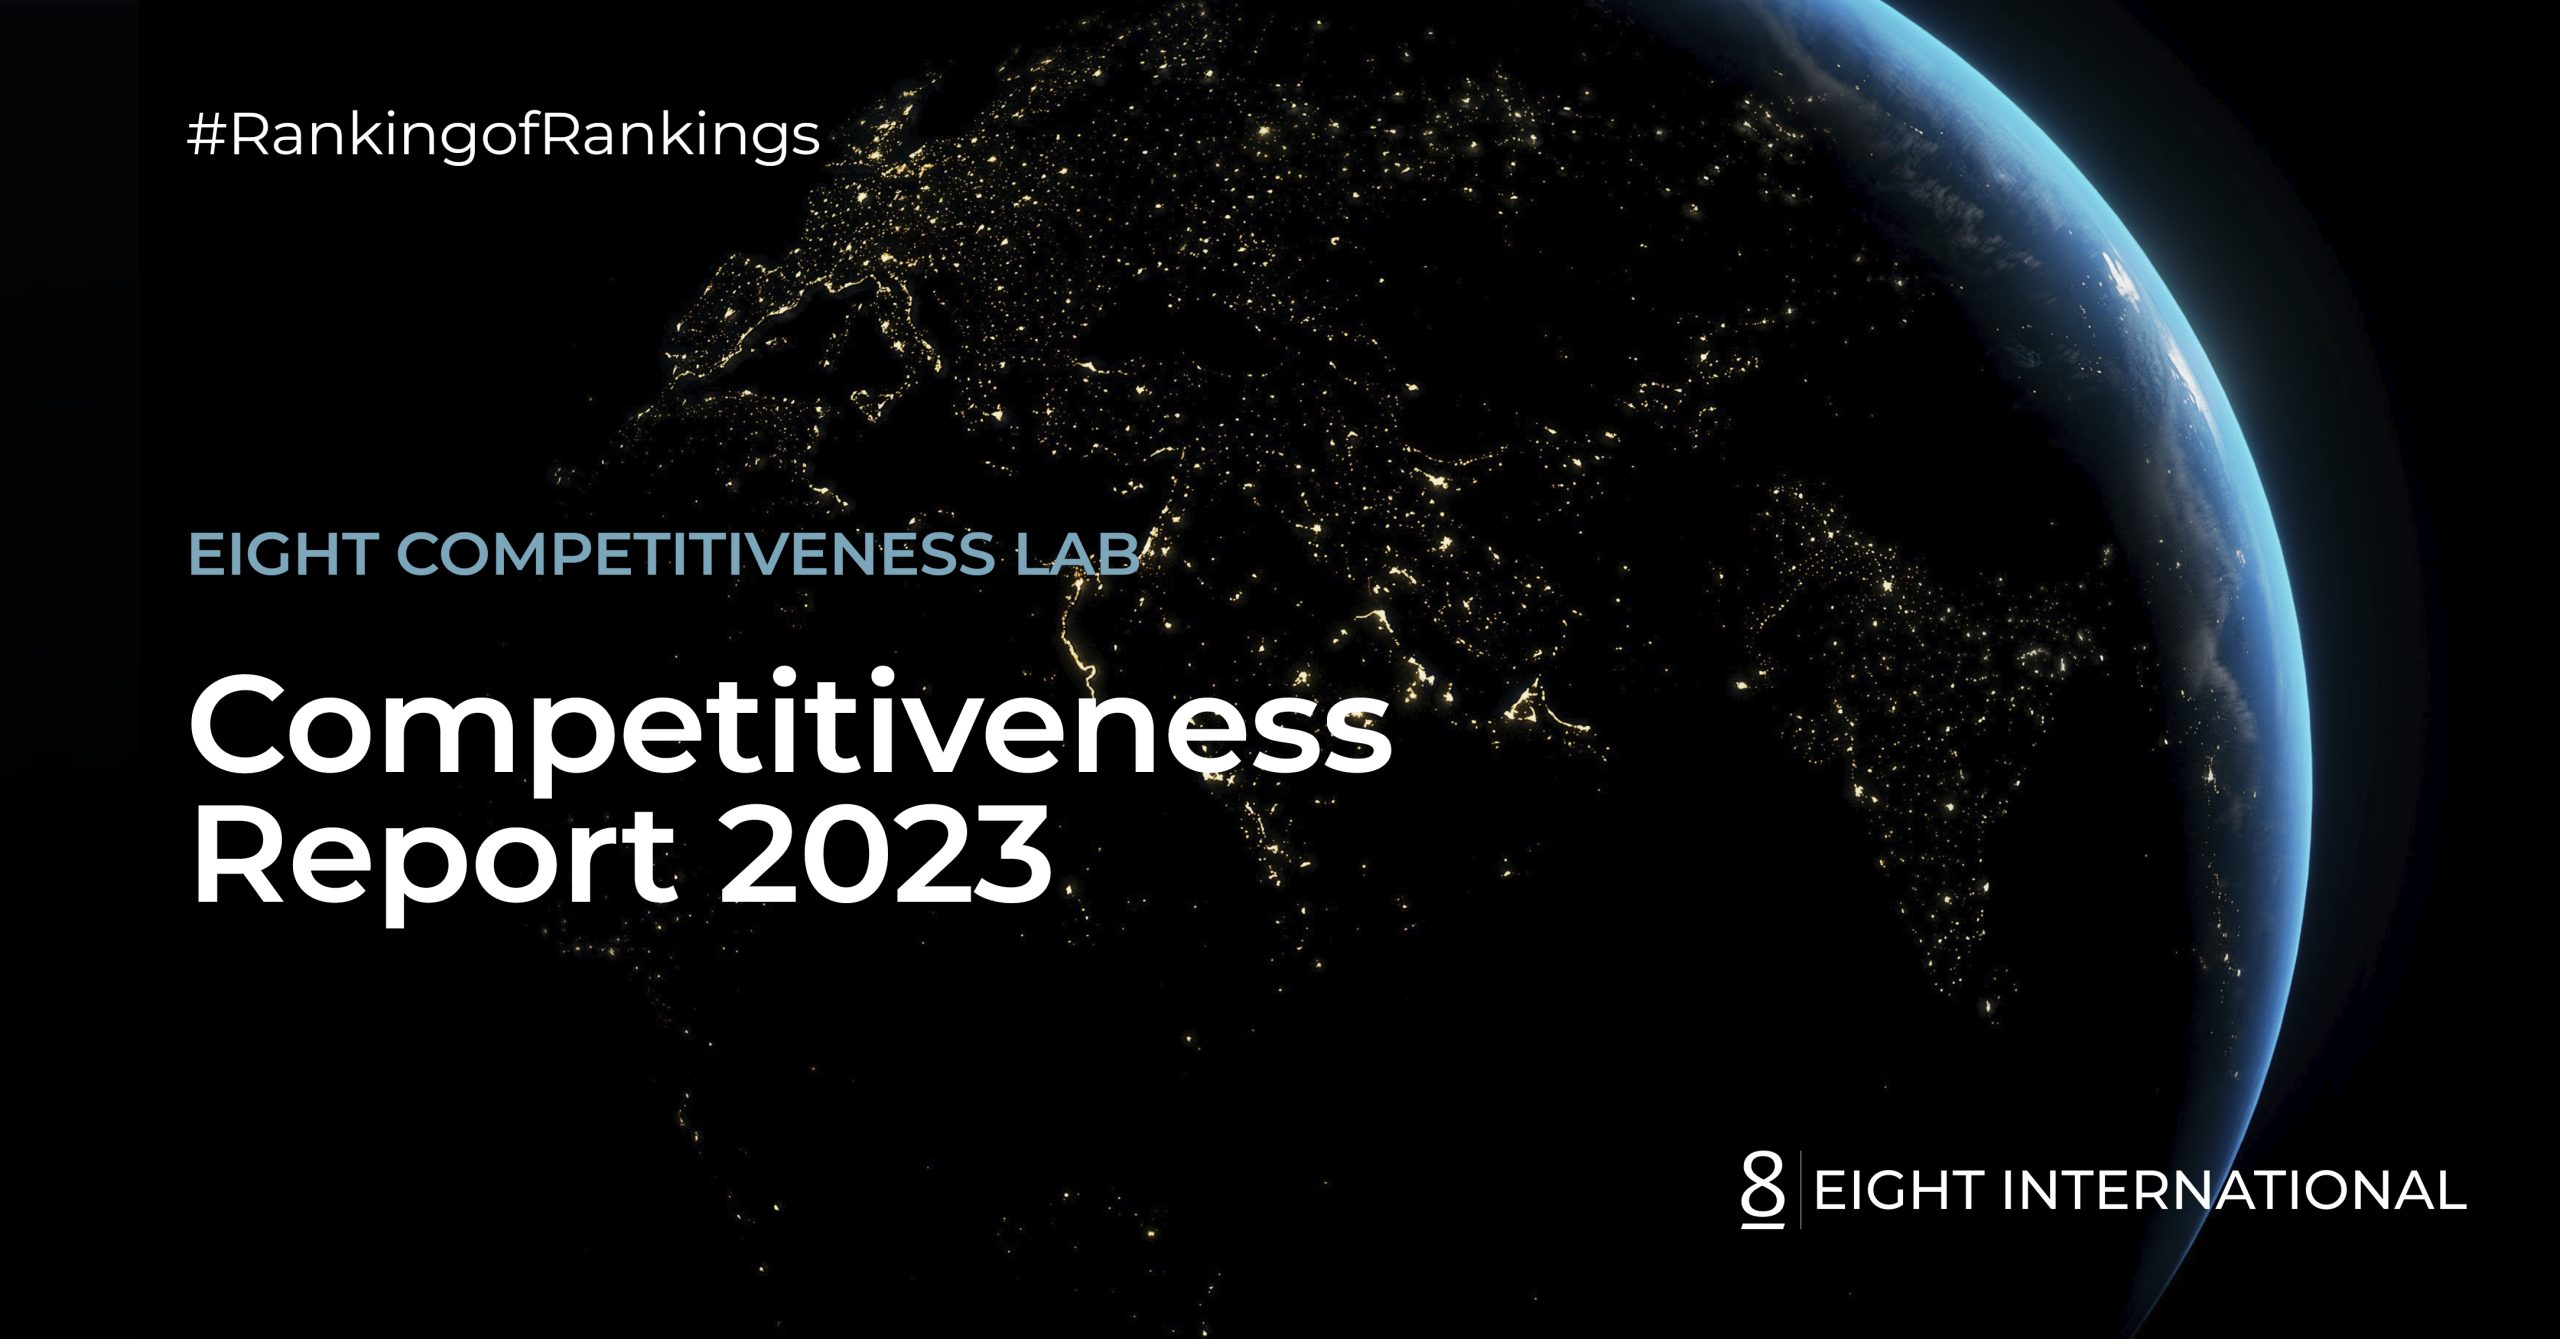 Eight Competitiveness Report 2023